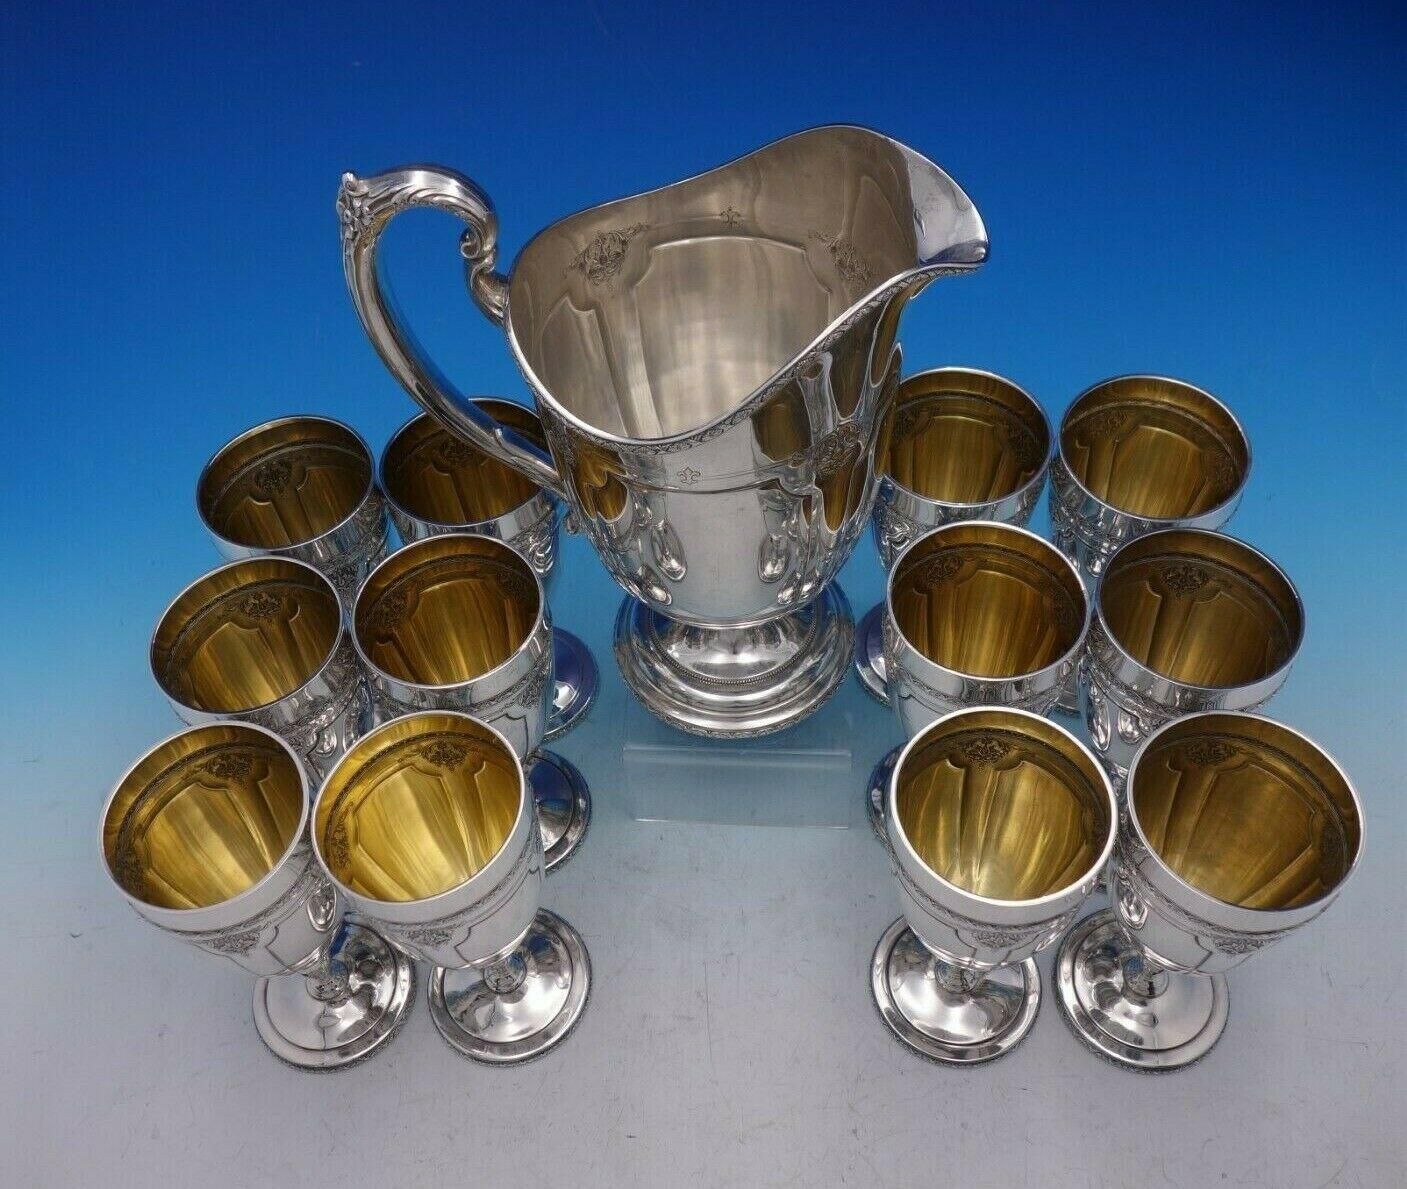 Louis XIV by Towle

Stunning Louis XIV by Towle sterling silver water goblet 13-piece set. This set includes:

12 - Water goblet: Marked #68160, measures 6 1/2